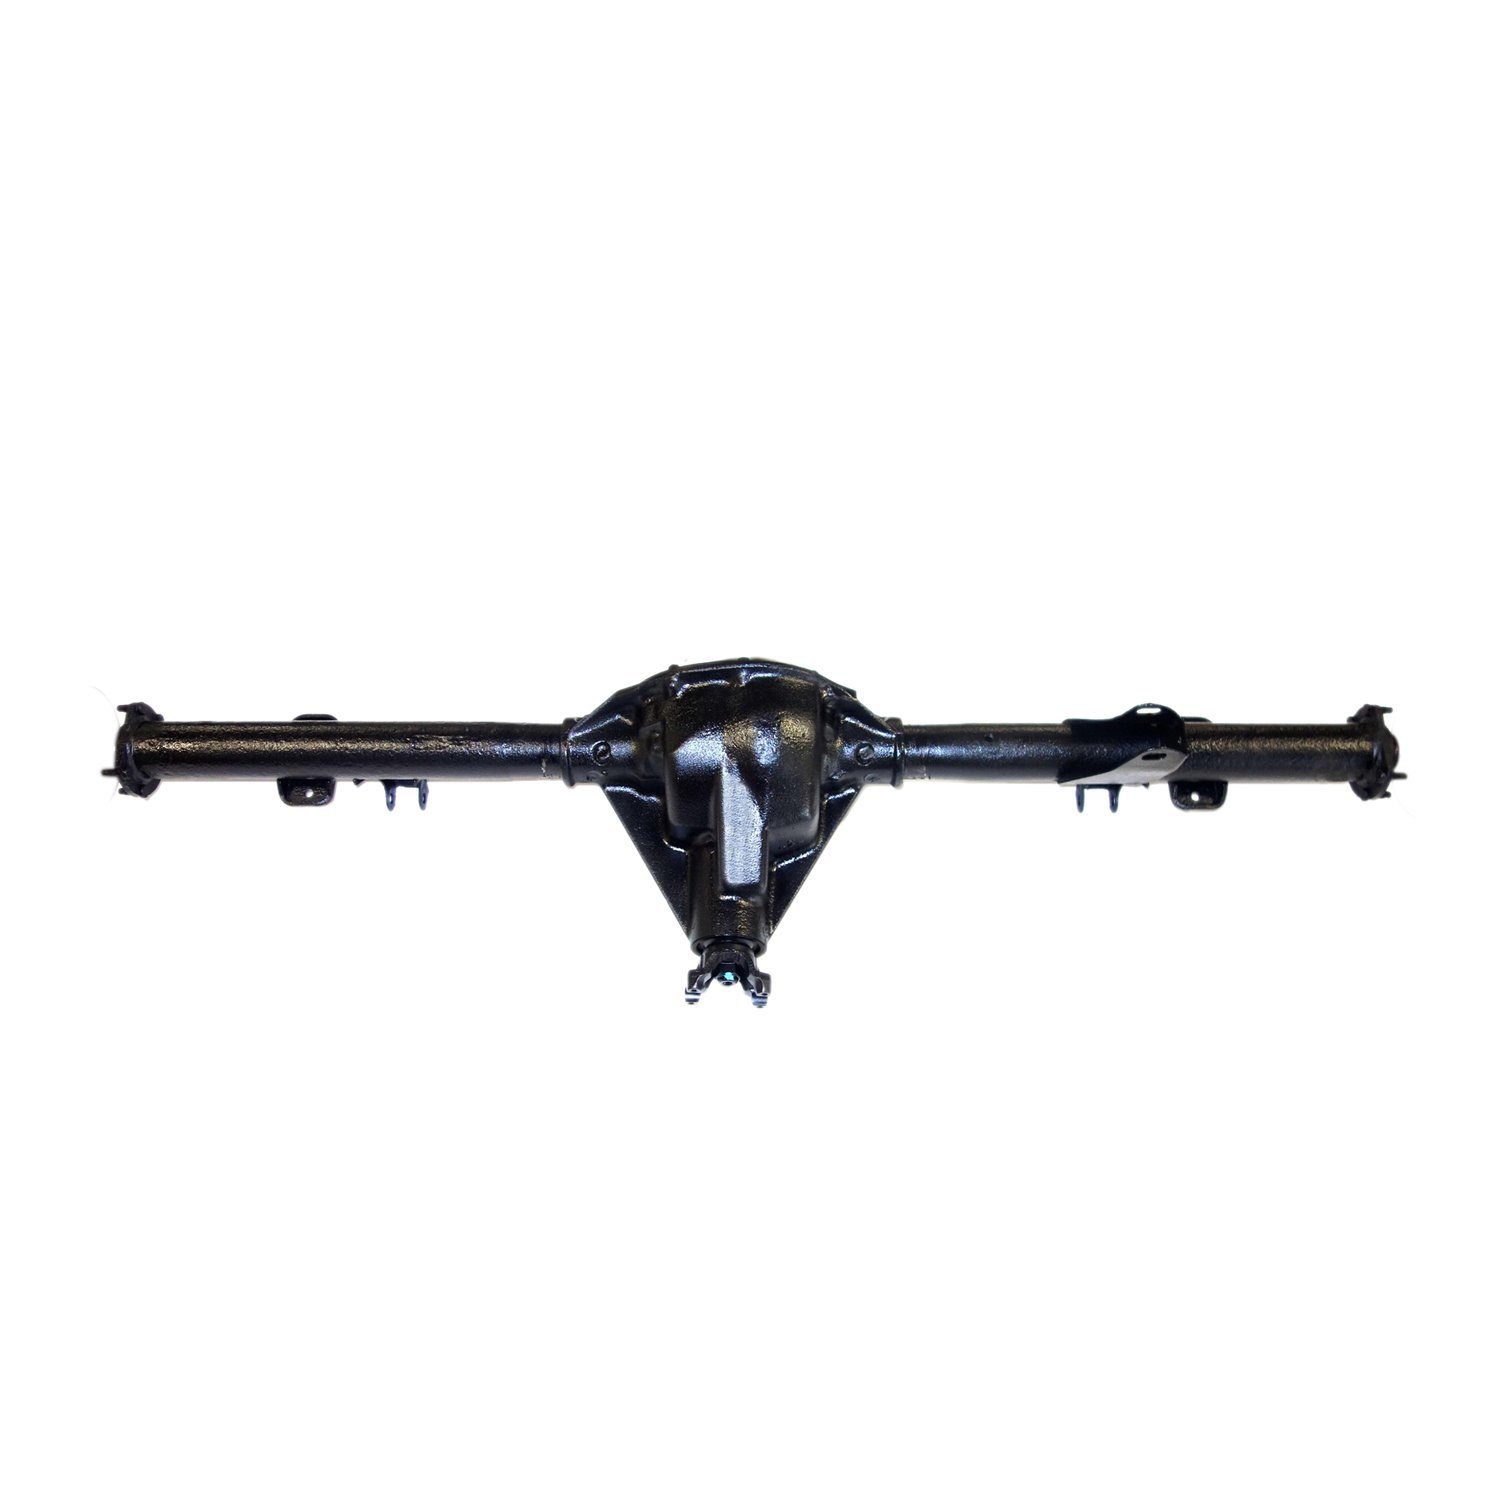 Remanufactured Complete Axle Assembly for Dana 35 91-96 Jeep Cherokee 3.07 Ratio, ABS